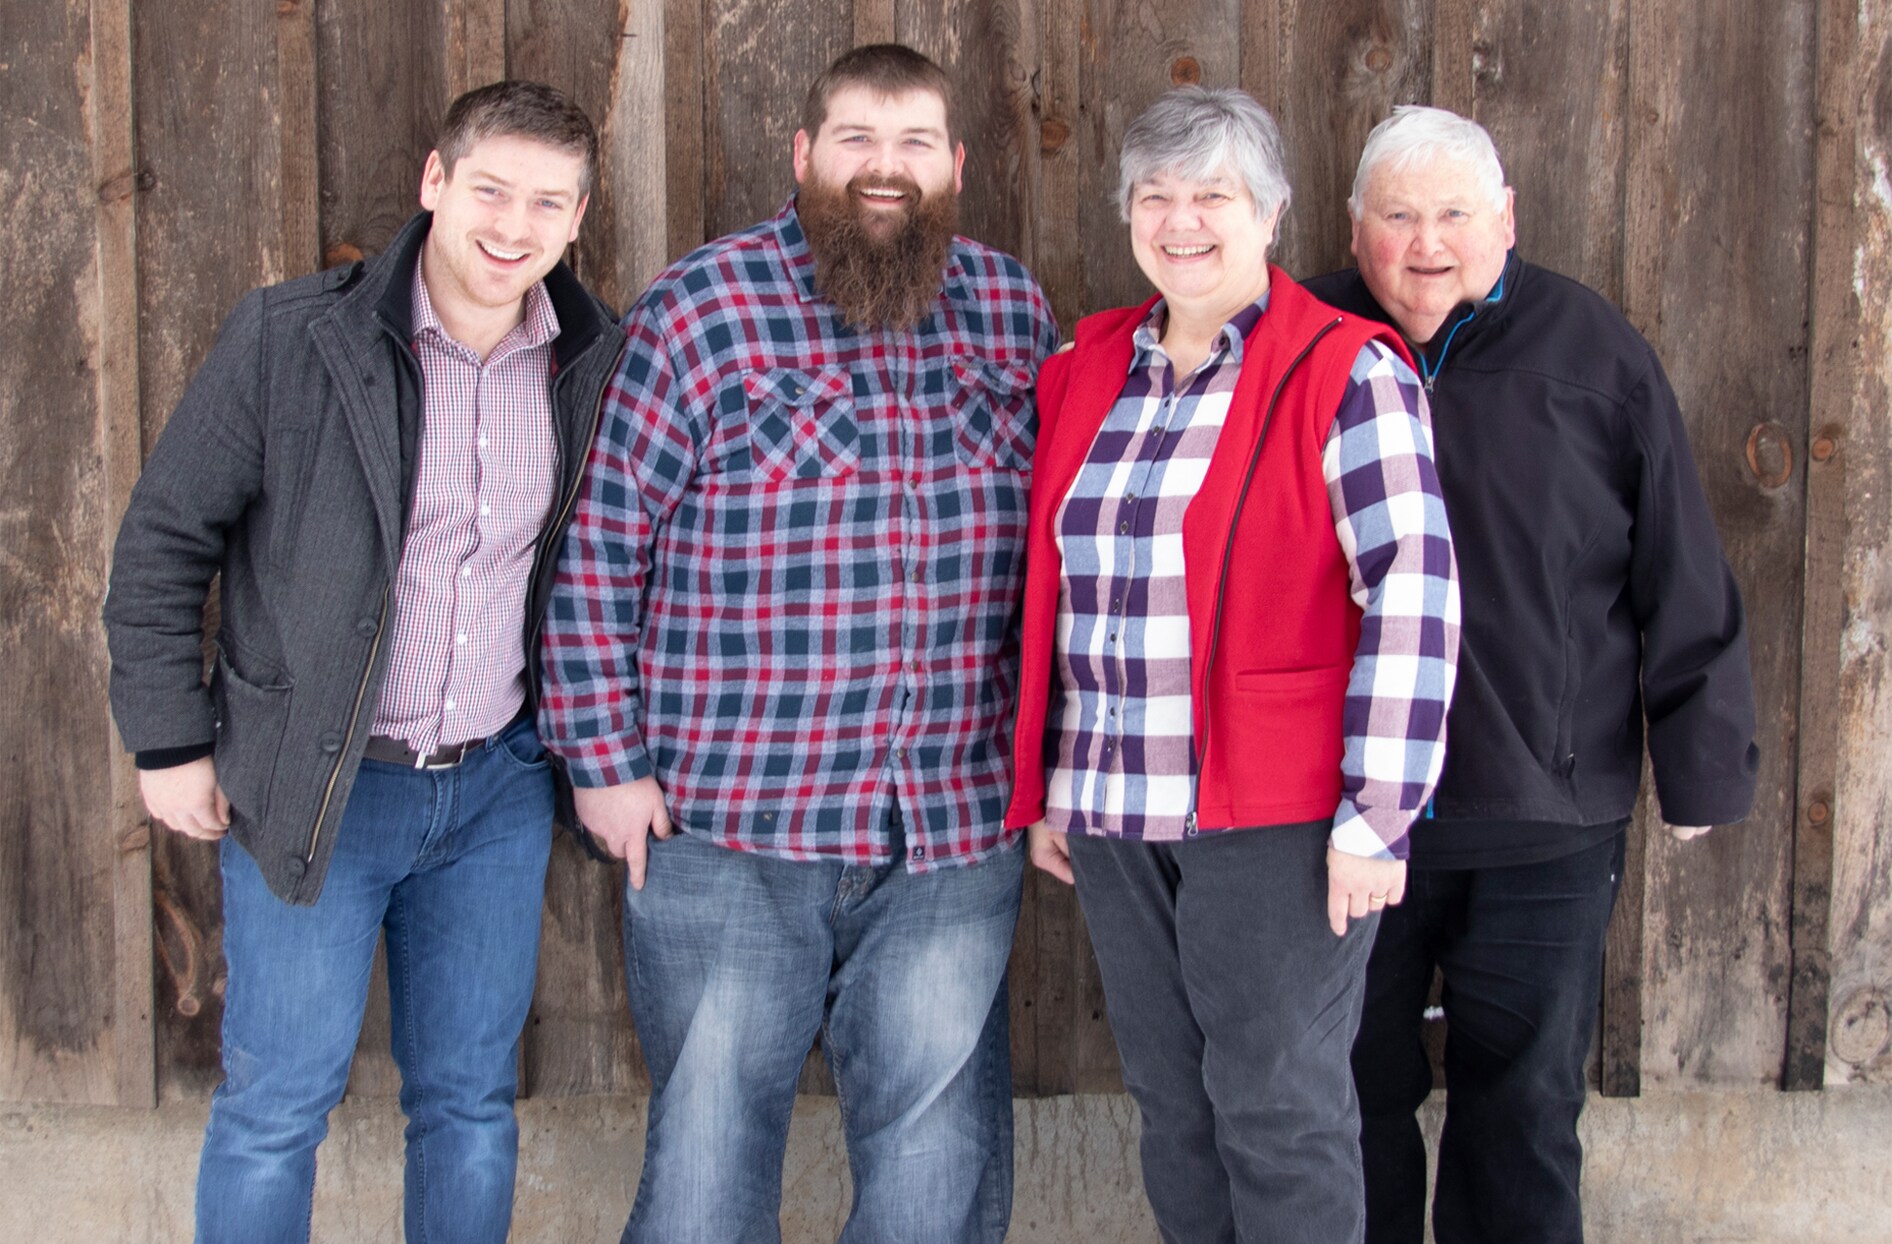 Chad Jakeman, his brother and parents are all smiles on the family farm, awaiting another great season ahead.  